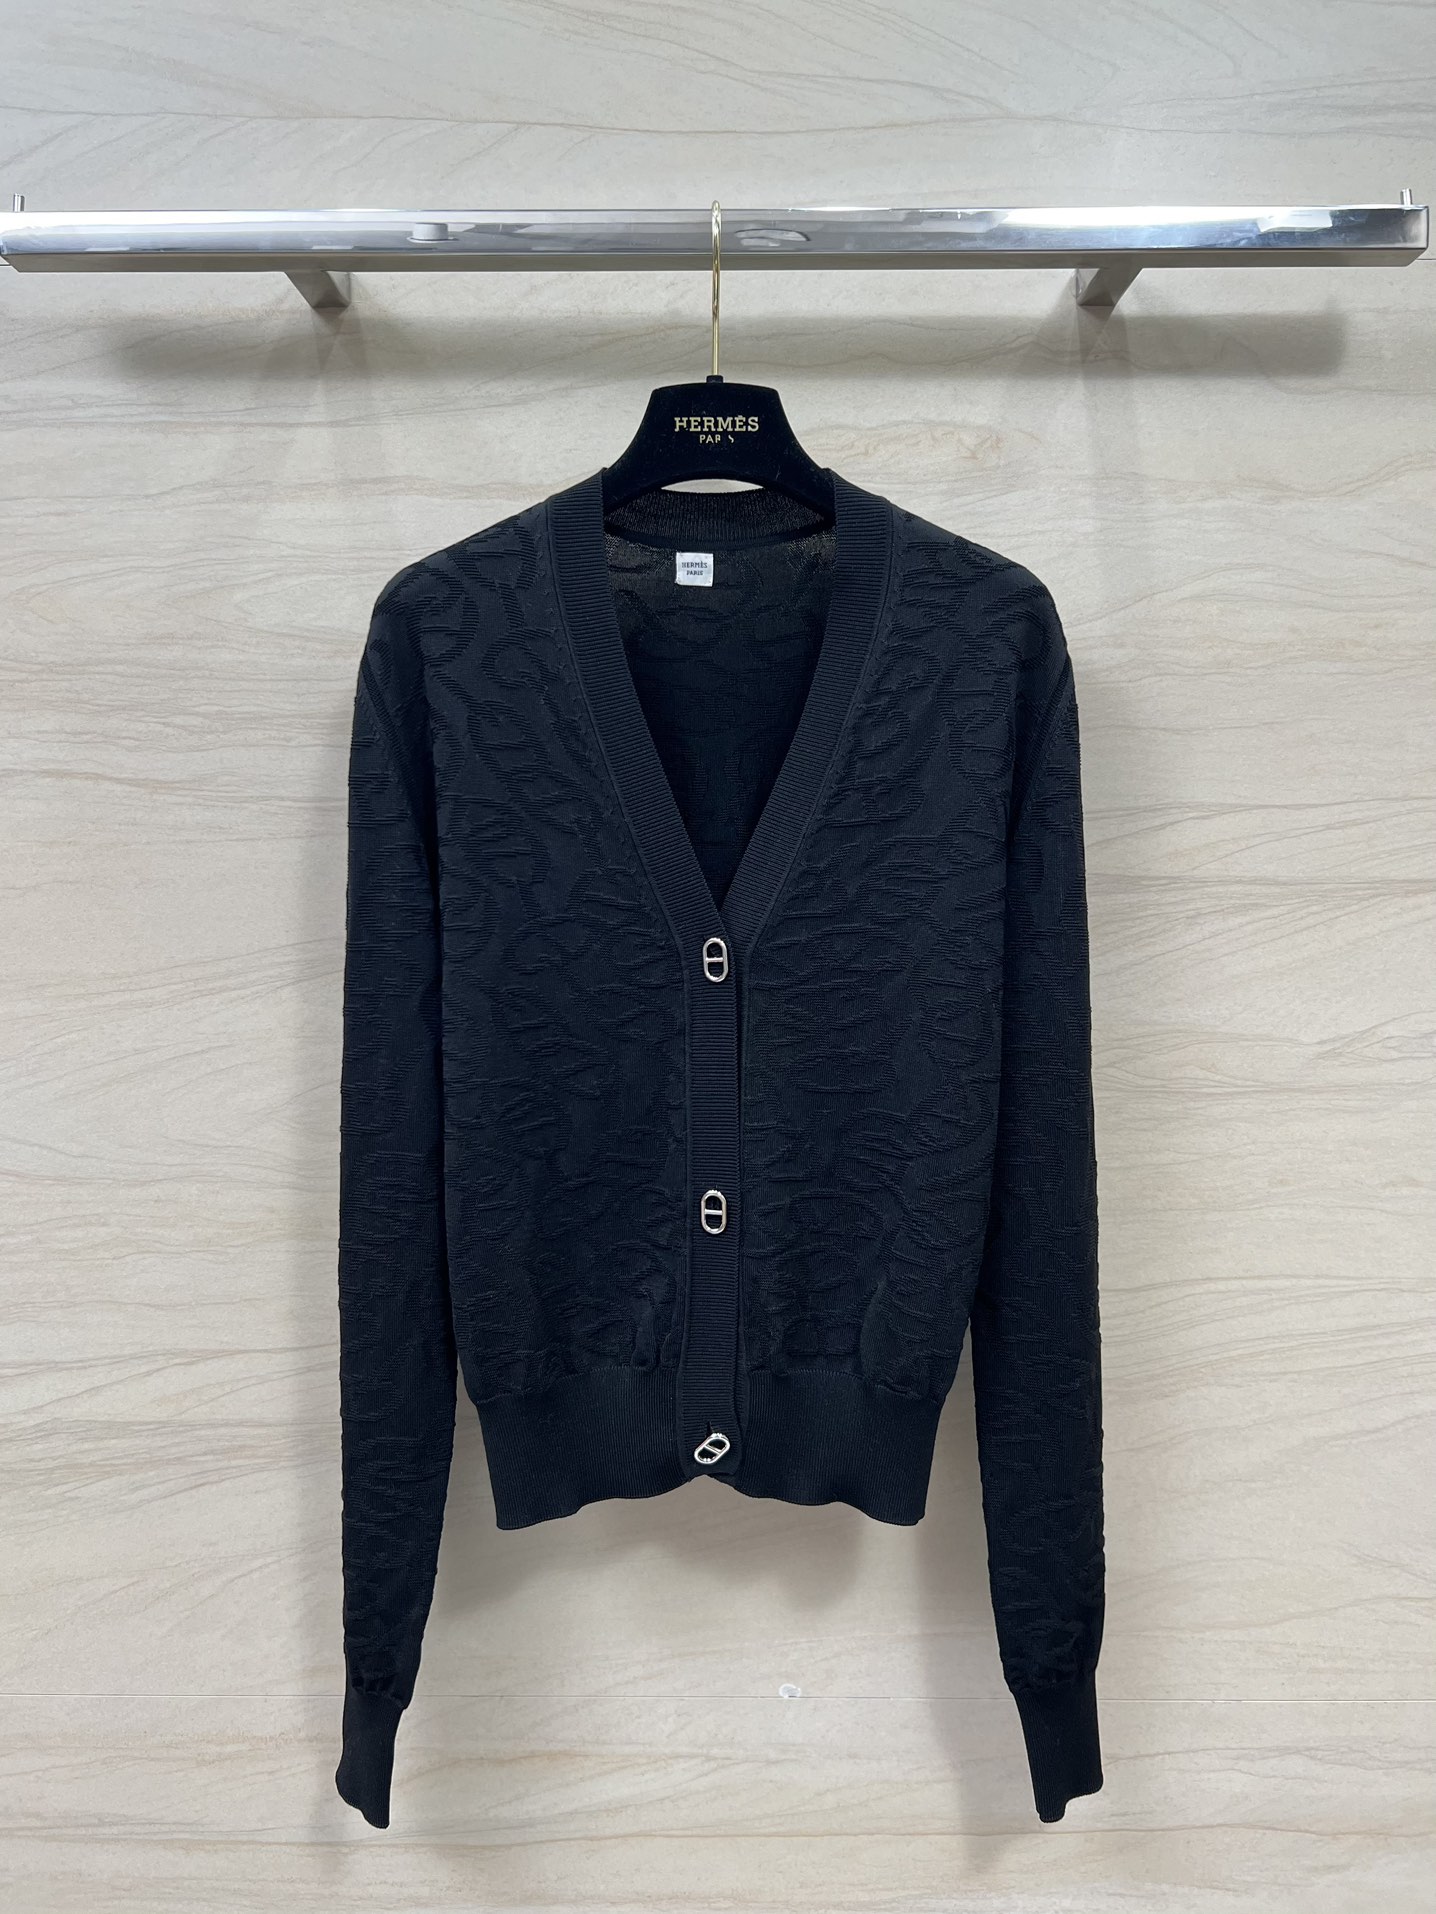 Hermes Clothing Cardigans Knit Sweater Knitting Spring/Summer Collection Chains